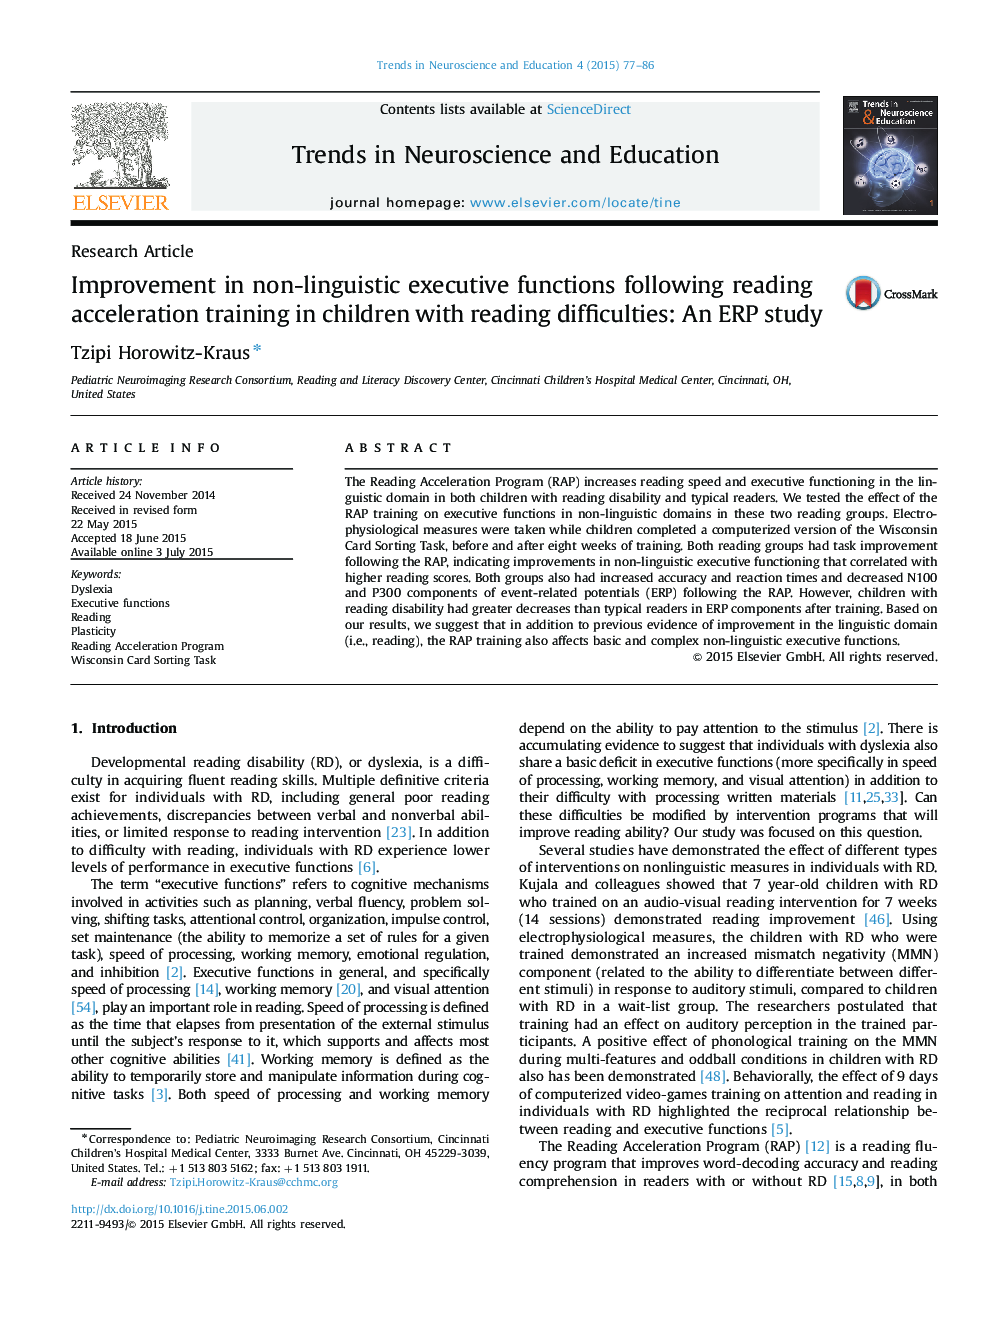 Improvement in non-linguistic executive functions following reading acceleration training in children with reading difficulties: An ERP study